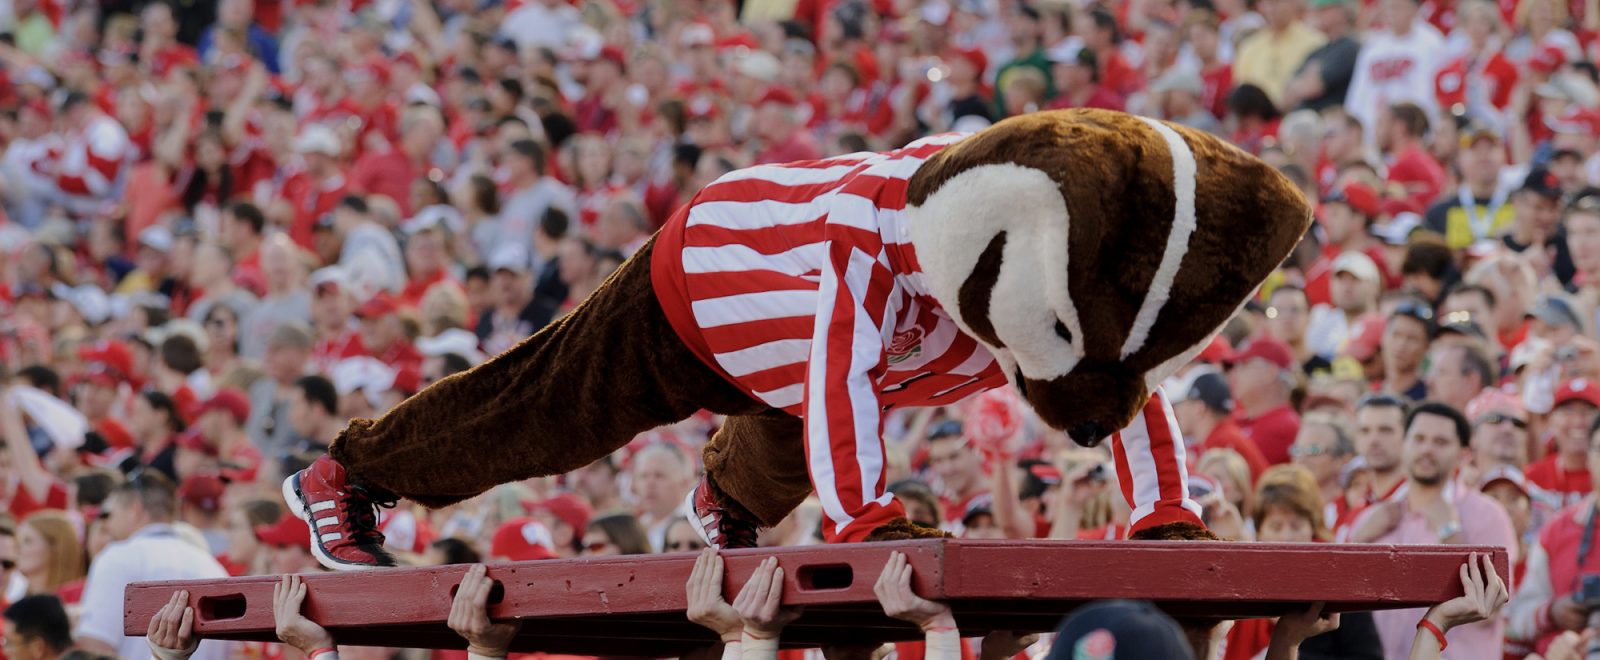 UW-Madison mascot Bucky Badger does another set of pushups following a Wisconsin touchdown during the 2012 Rose Bowl football game between the University of Wisconsin-Madison Badgers and the University of Oregon Ducks.